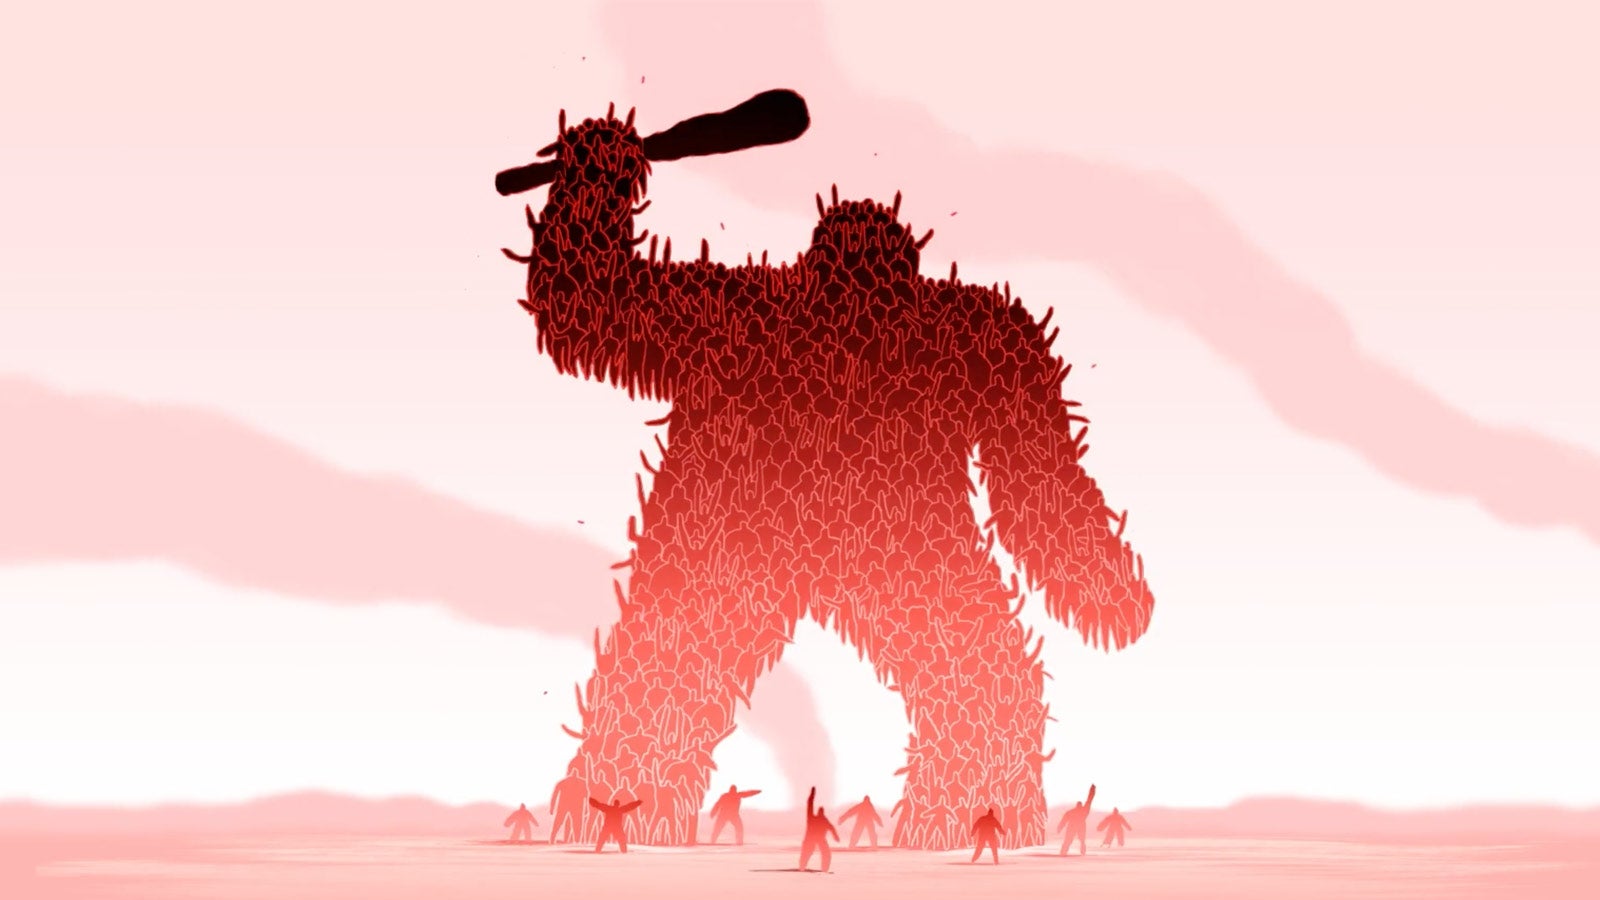 A large, red, angry monster made up of a community of people.